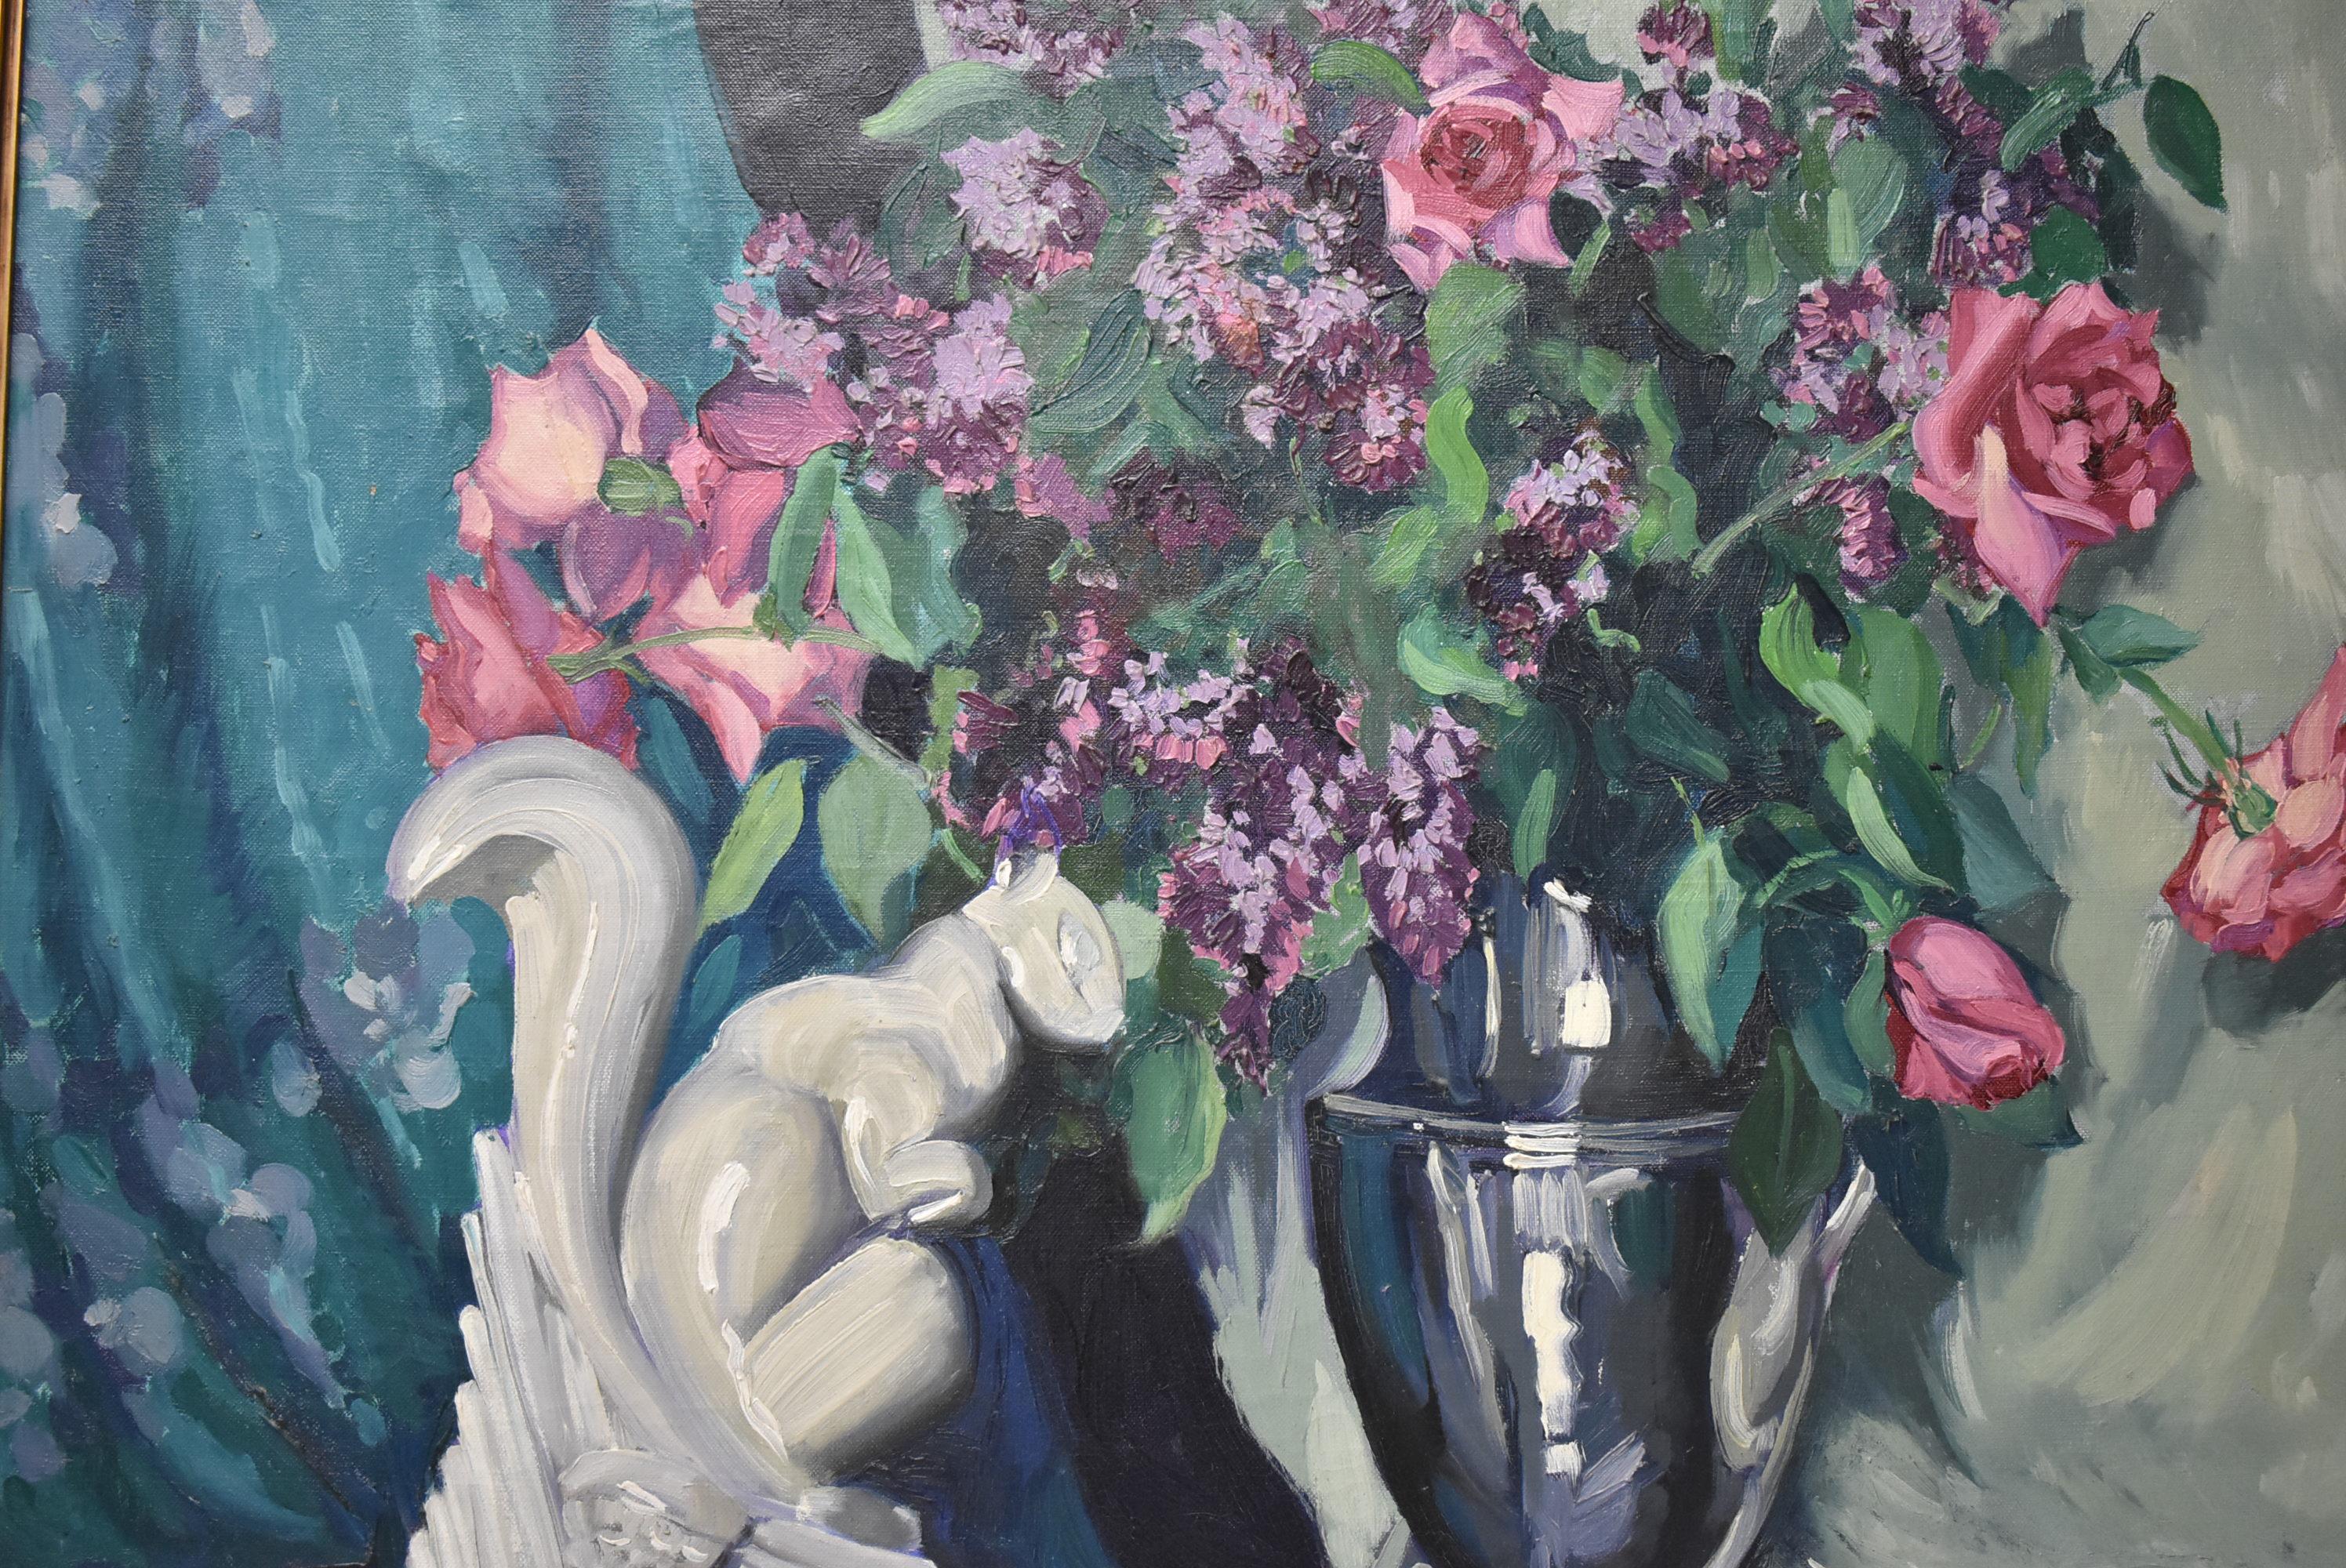 Oil painting on canvas by American artist Leonore Smith Jerrems with Necomb Macklin frame. Lovely floral arrangement in deep tones of blues, greens, pinks and purples complemented by a whimsical squirrel figure. Interesting detail surrounds the